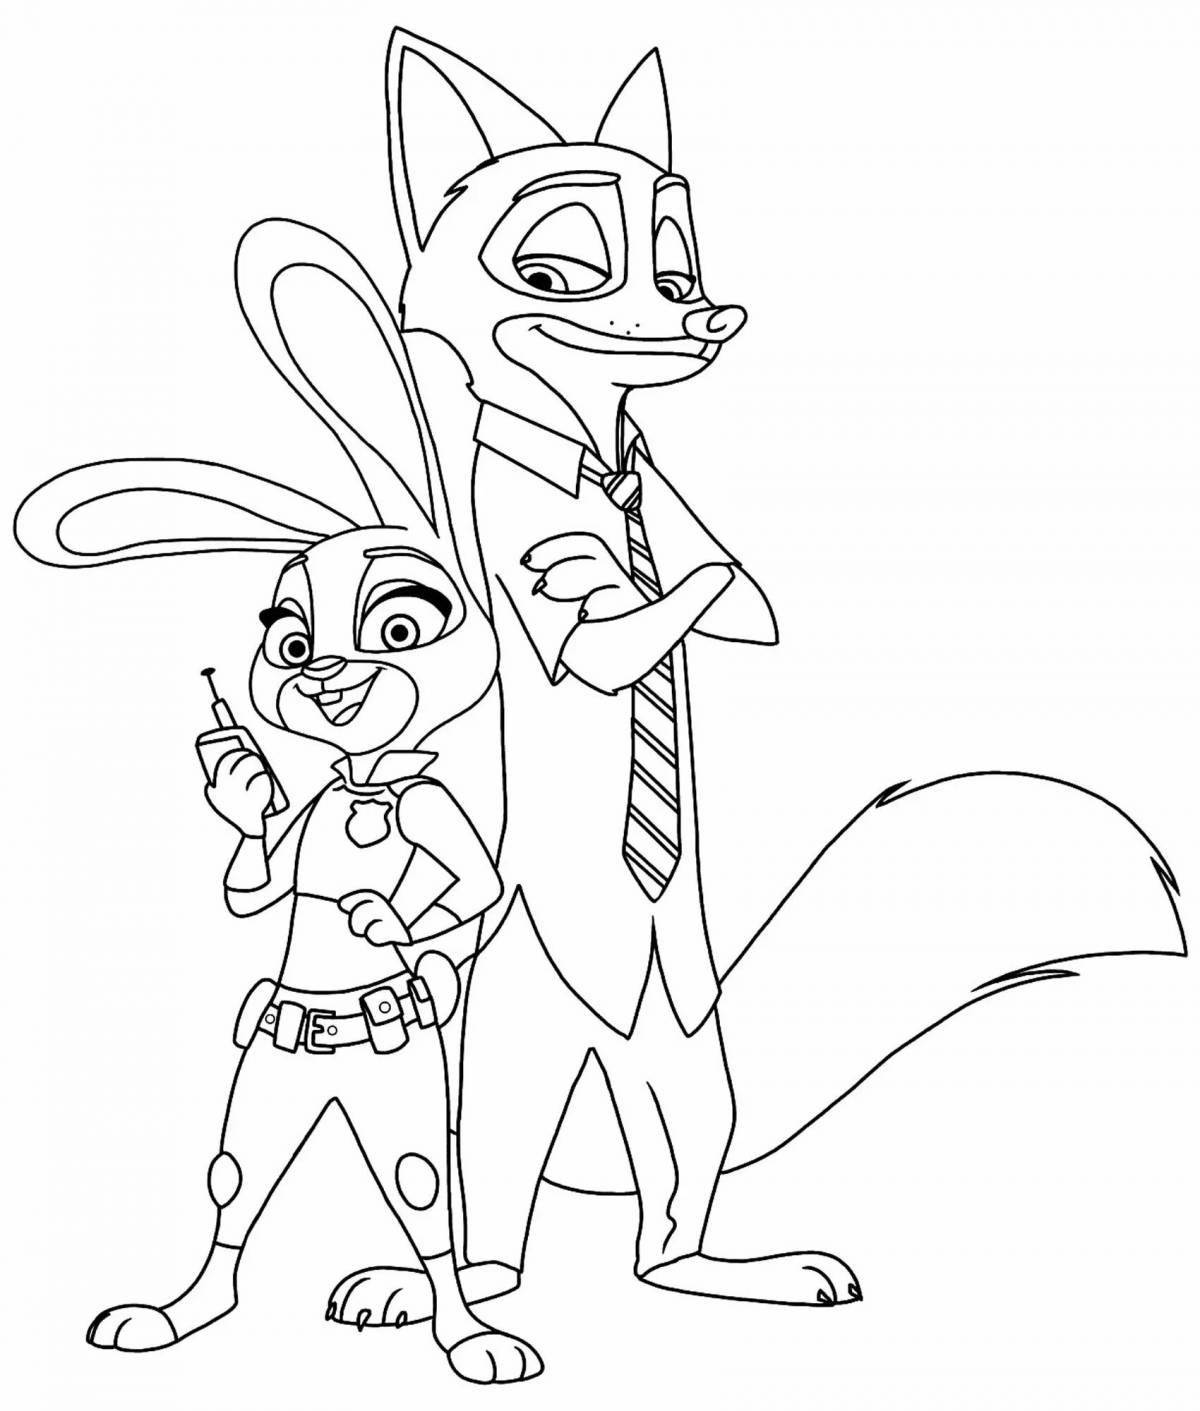 Gorgeous judy hopps coloring book